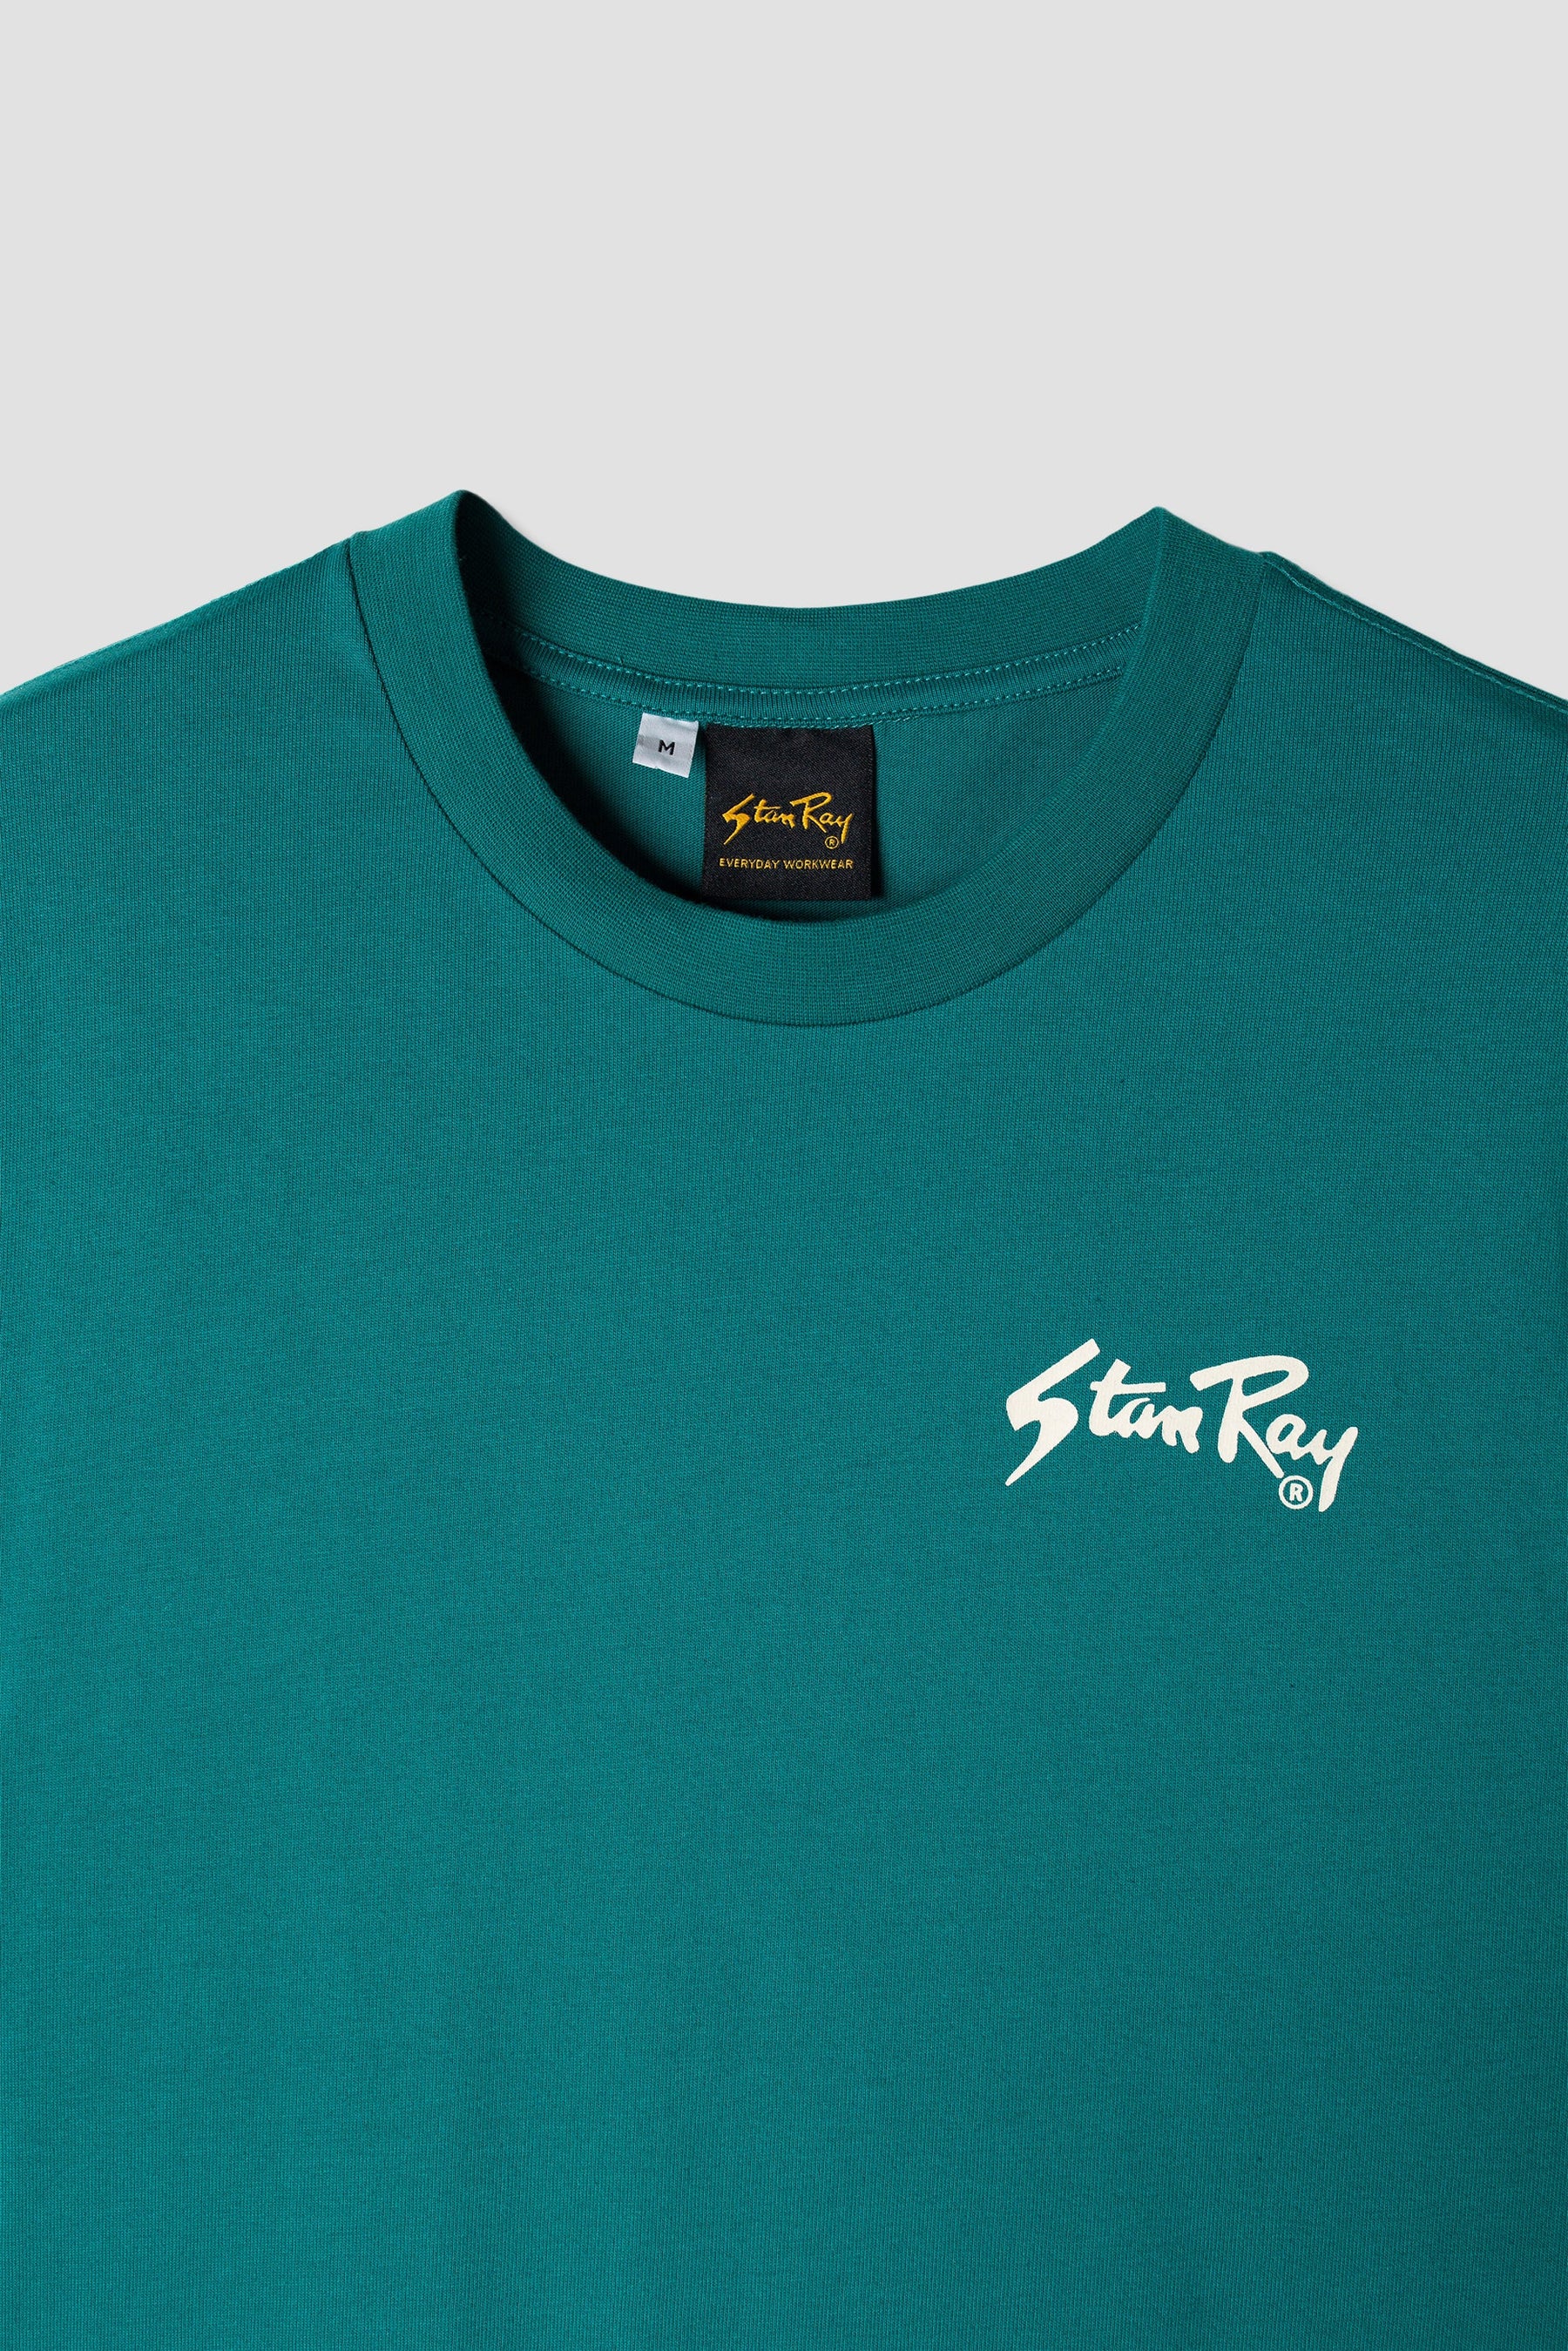 Stan Ray Tee (Agave/White)